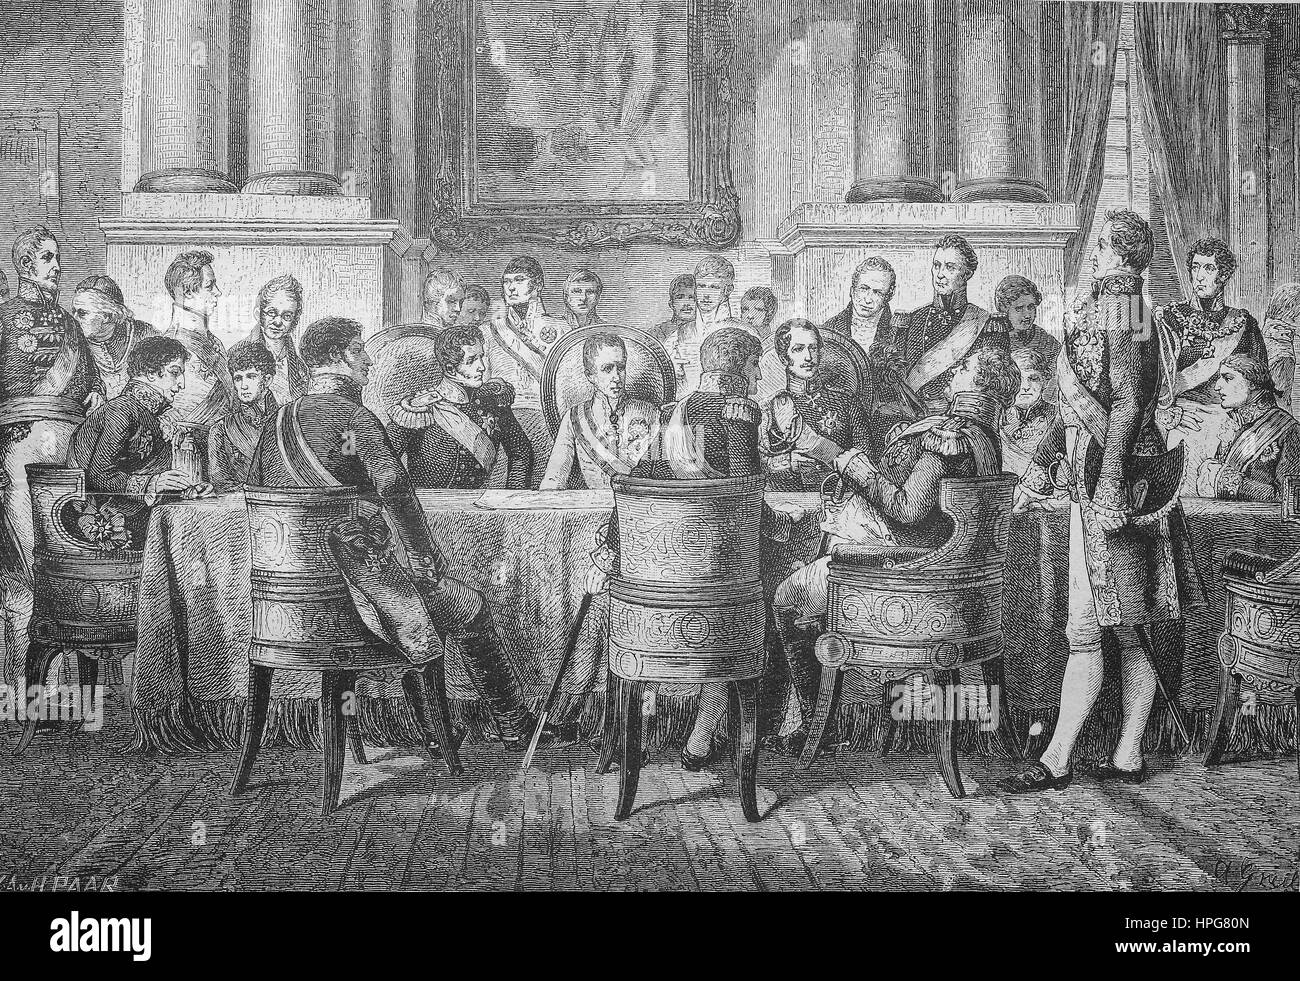 The Vienna Congress in 1815, Austria, Der Wiener Kongre? im Jahre 1815, Oesterreich, digital improved reproduction of a woodcut from the year 1885 Stock Photo